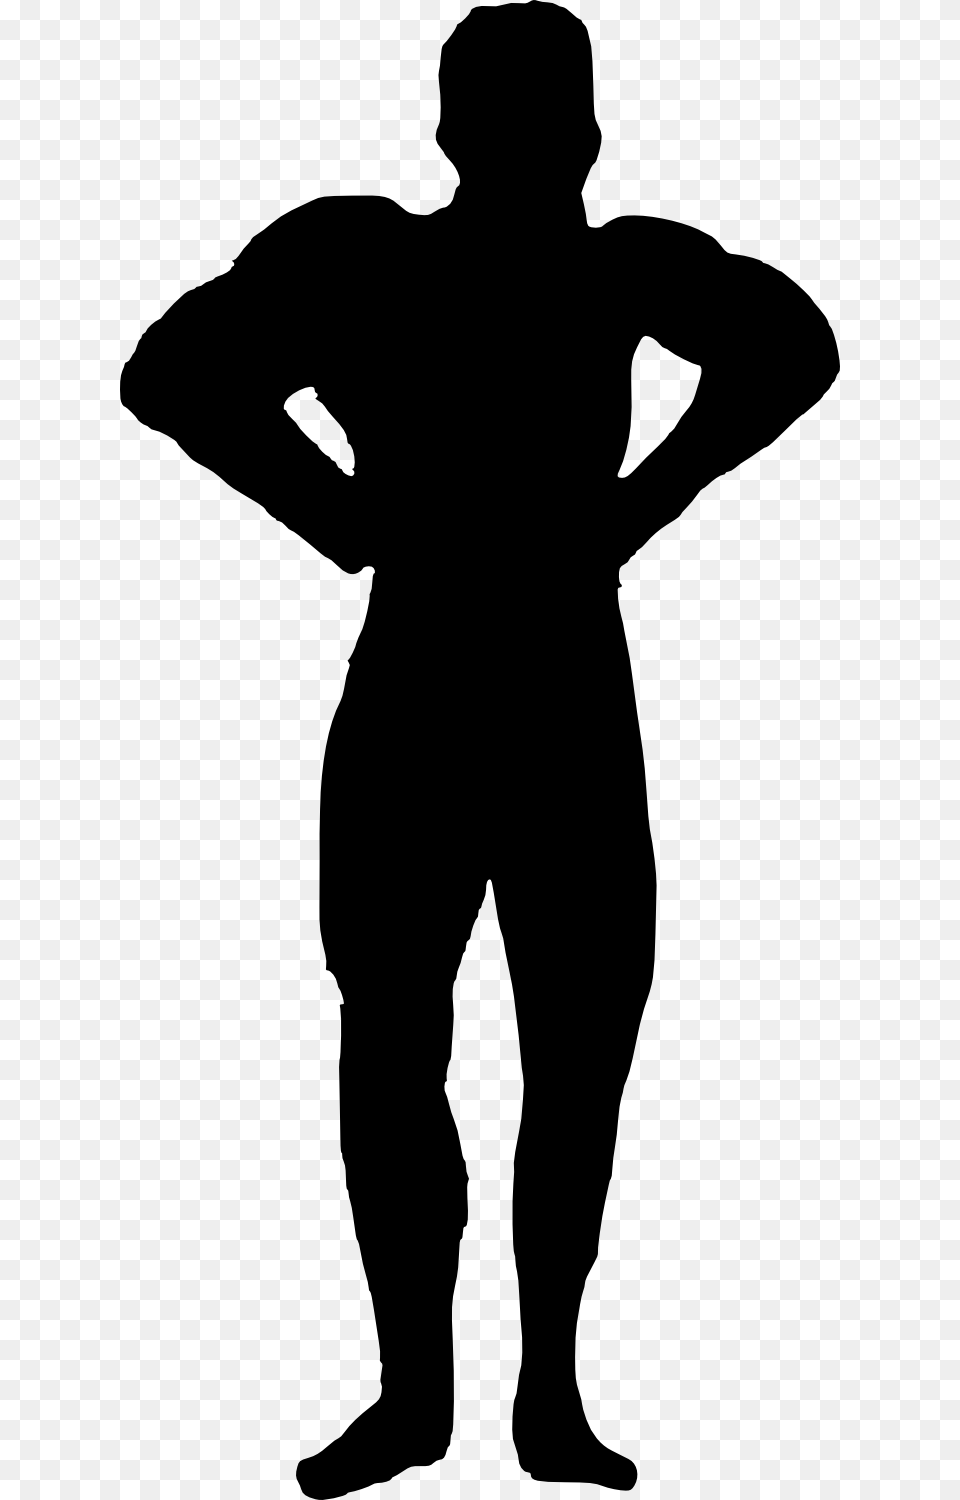 Bodybuilding, Adult, Male, Man, Person Free Png Download